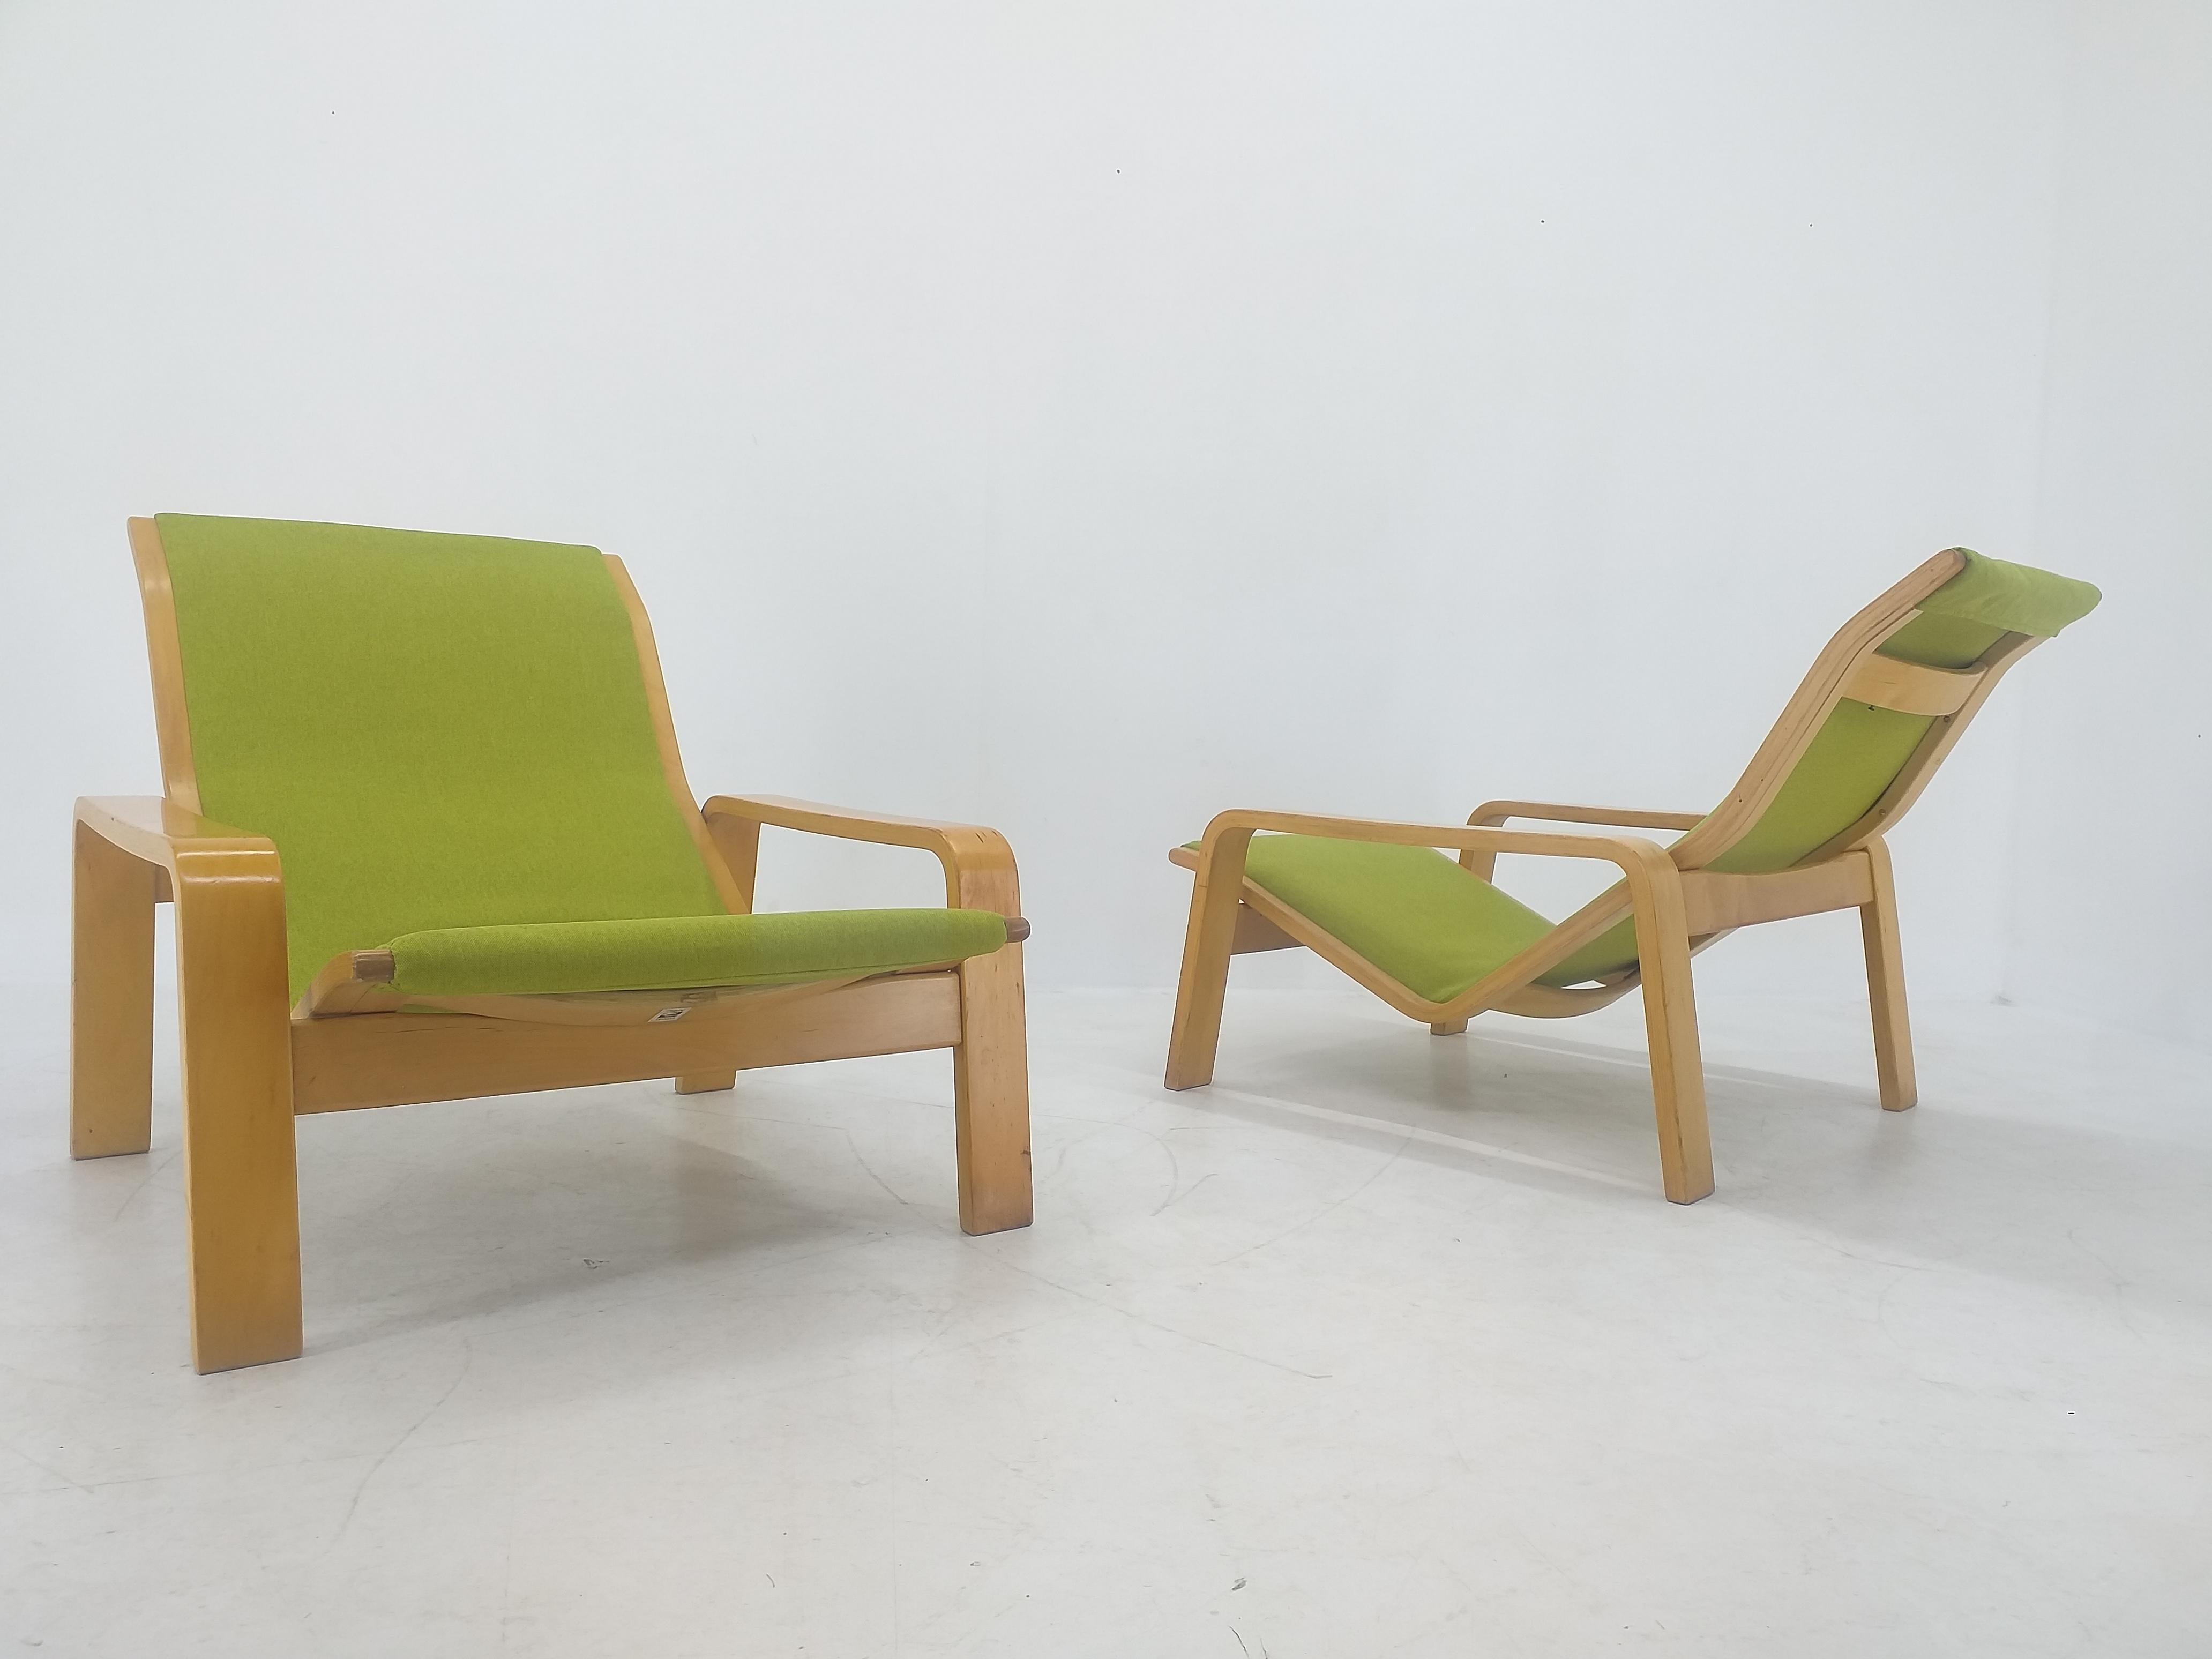 Pair of Lounge Chairs Pulkka, Ilmari Lappalainen for ASKO, Finland, 1970s For Sale 7